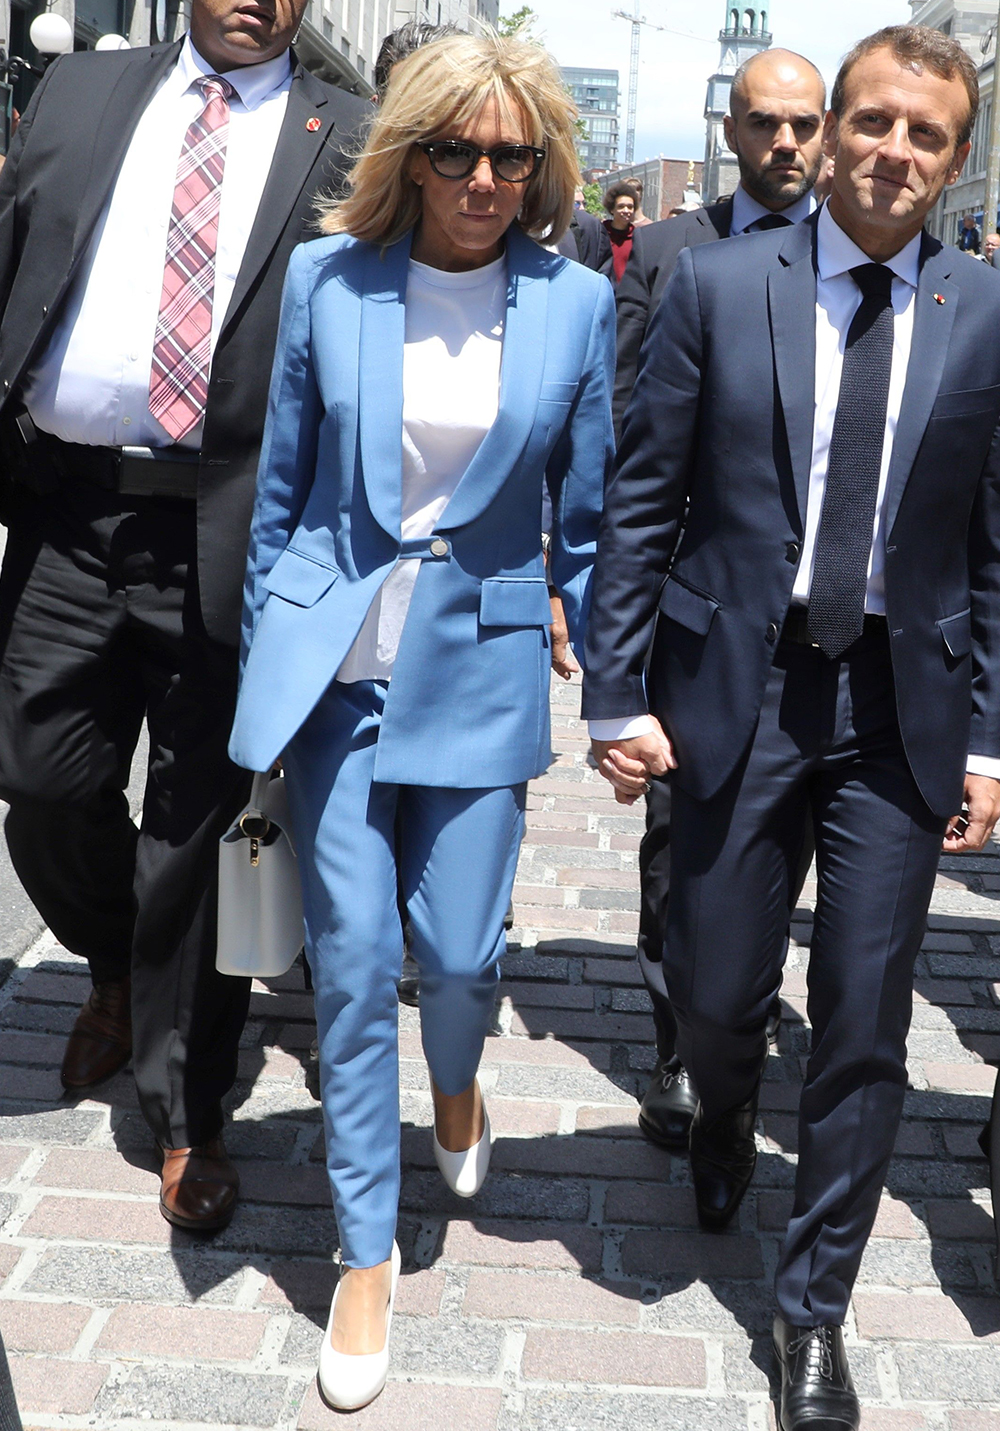 over 50 fashion and clothing inspiration: Brigitte Macron in a pastel blue suit and white T-shirt